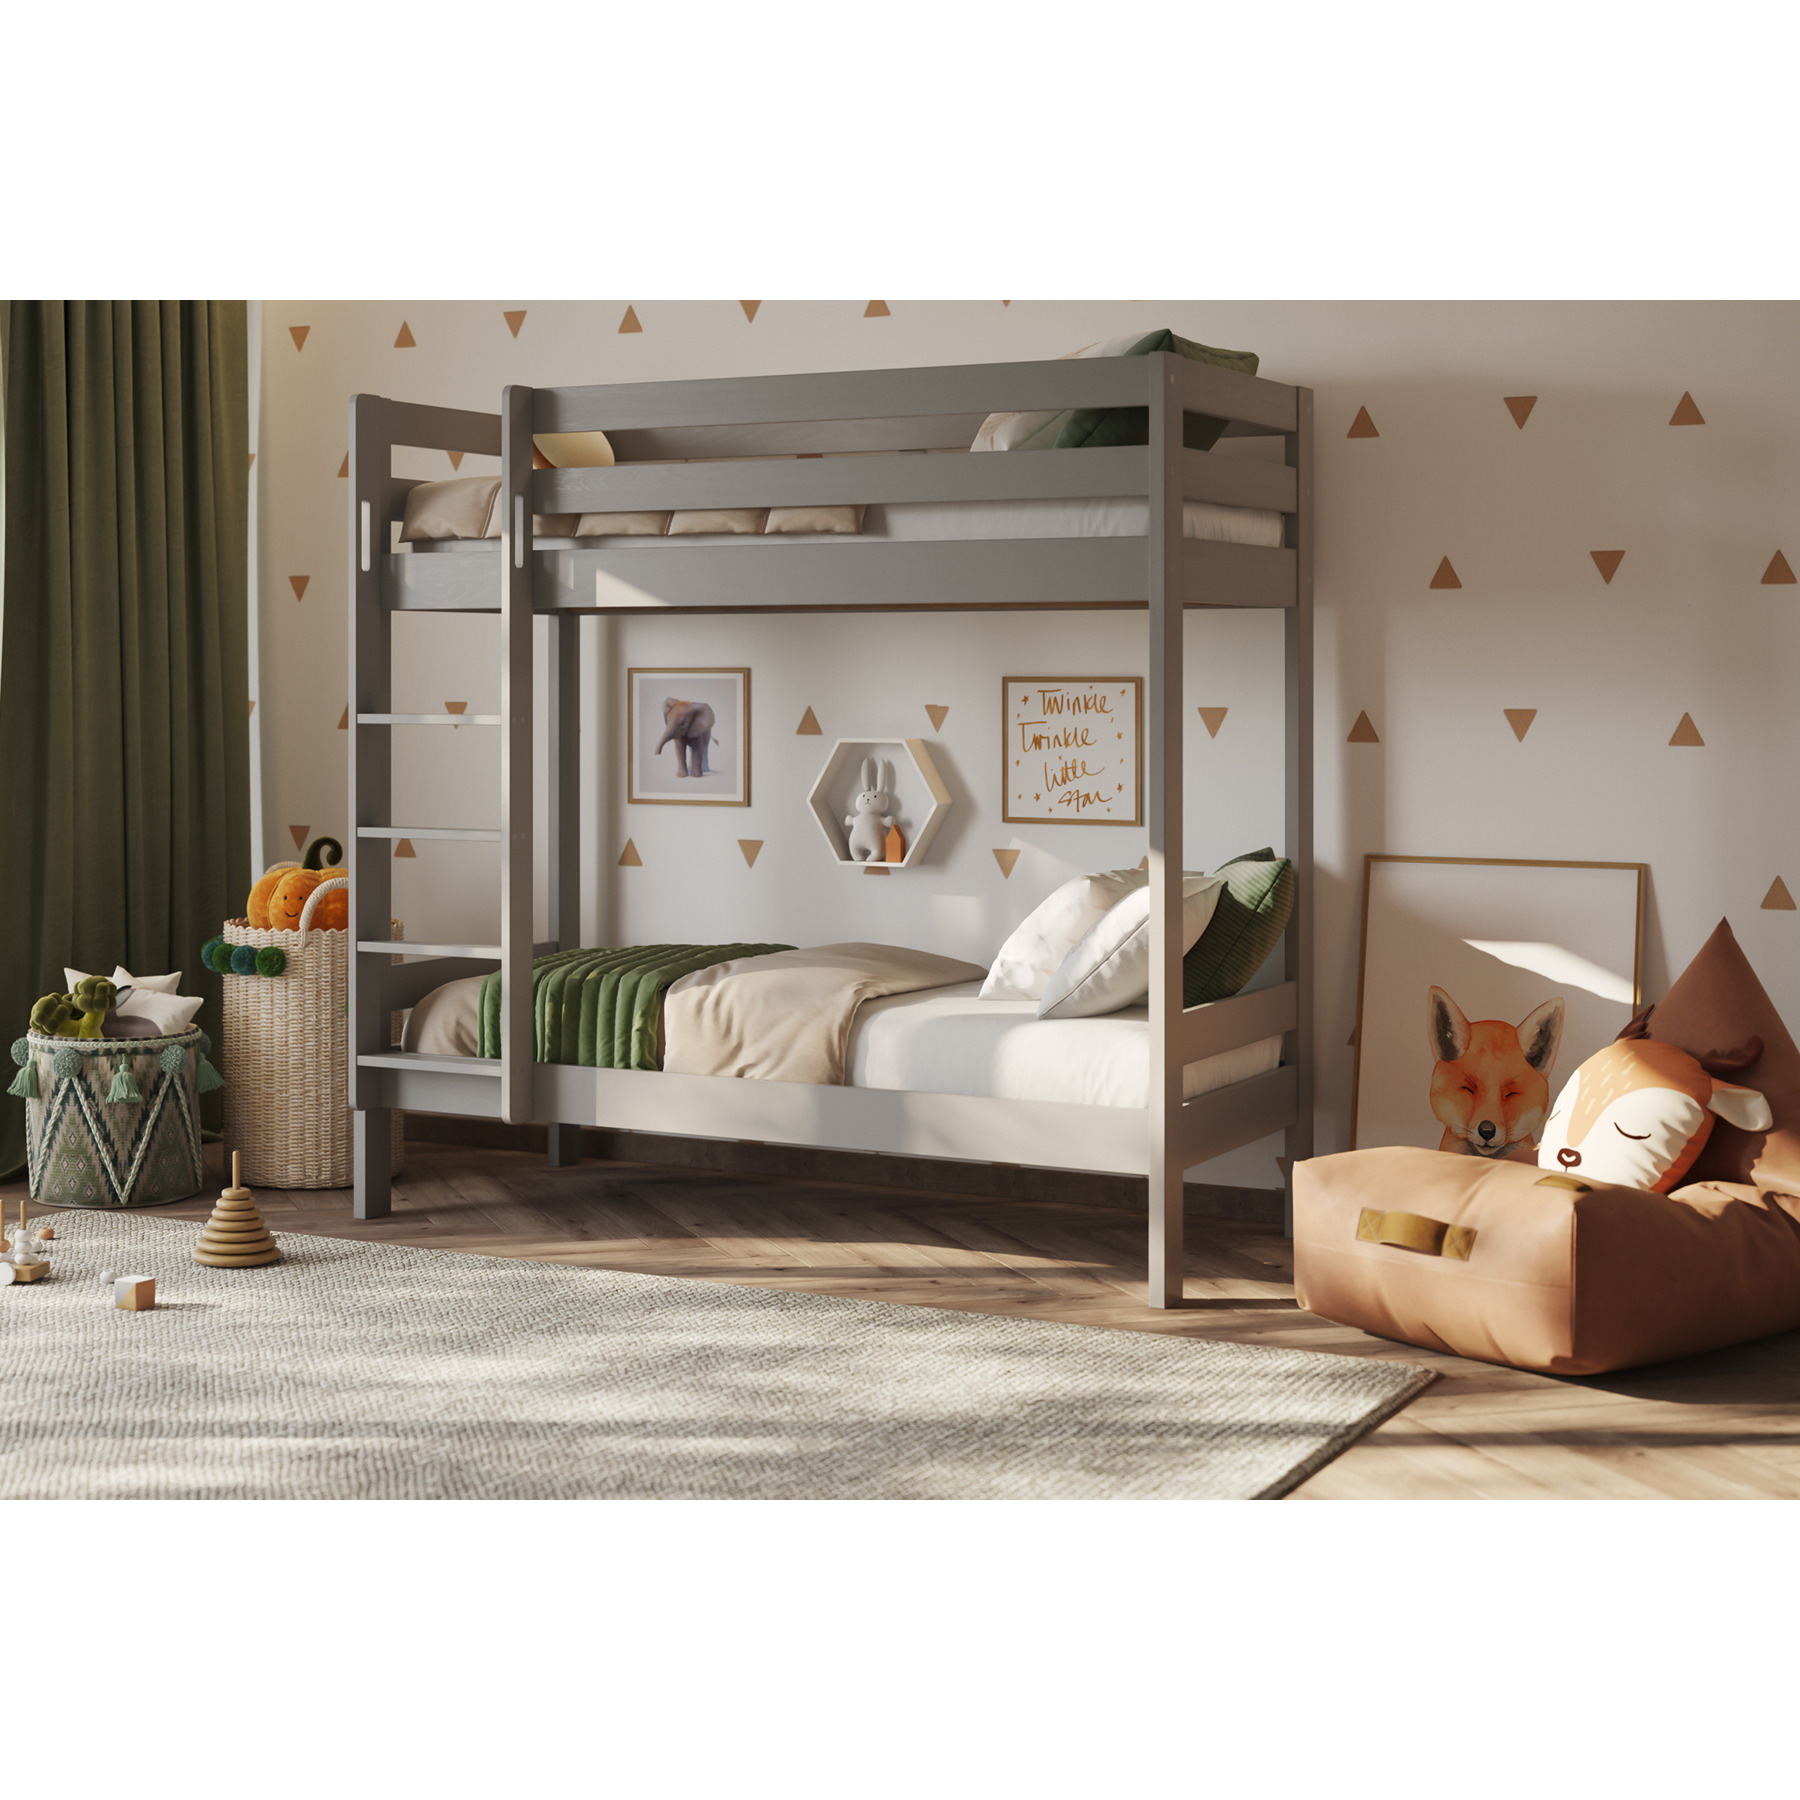 Noomi Nora Solid Wood Shorty Bunk Bed (FSC Certified) Grey - image 1